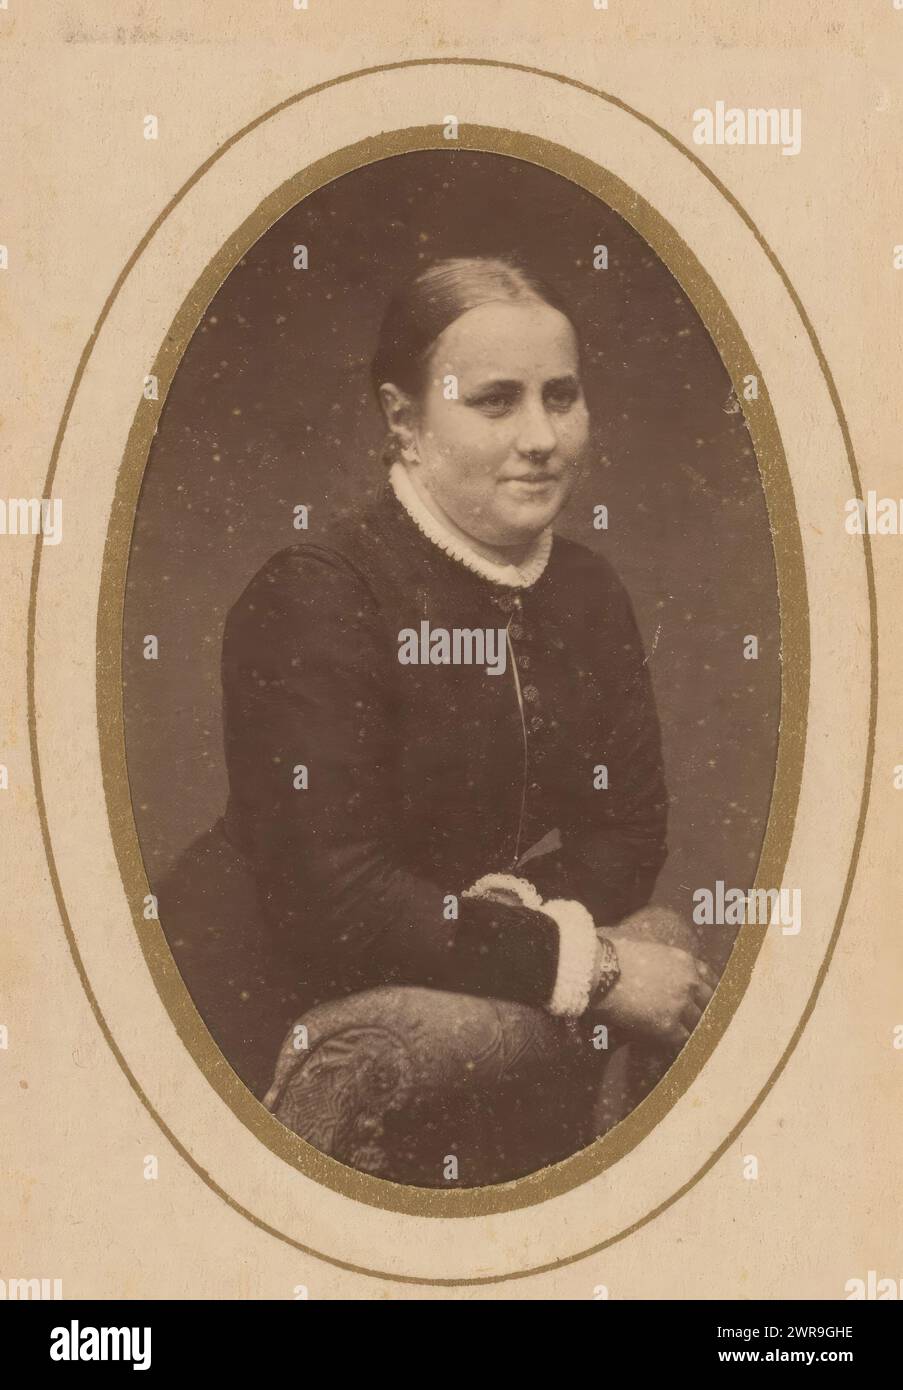 Portrait of a woman leaning on an armchair, This photo is part of an album., C. van der Aa & J. Chrispijn, Camillus Franciscus van der Aa, Jacques Chrispijn, Noord-Holland, 1884 - 1895, photographic support, albumen print, height 82 mm × width 51 mm, photograph Stock Photo